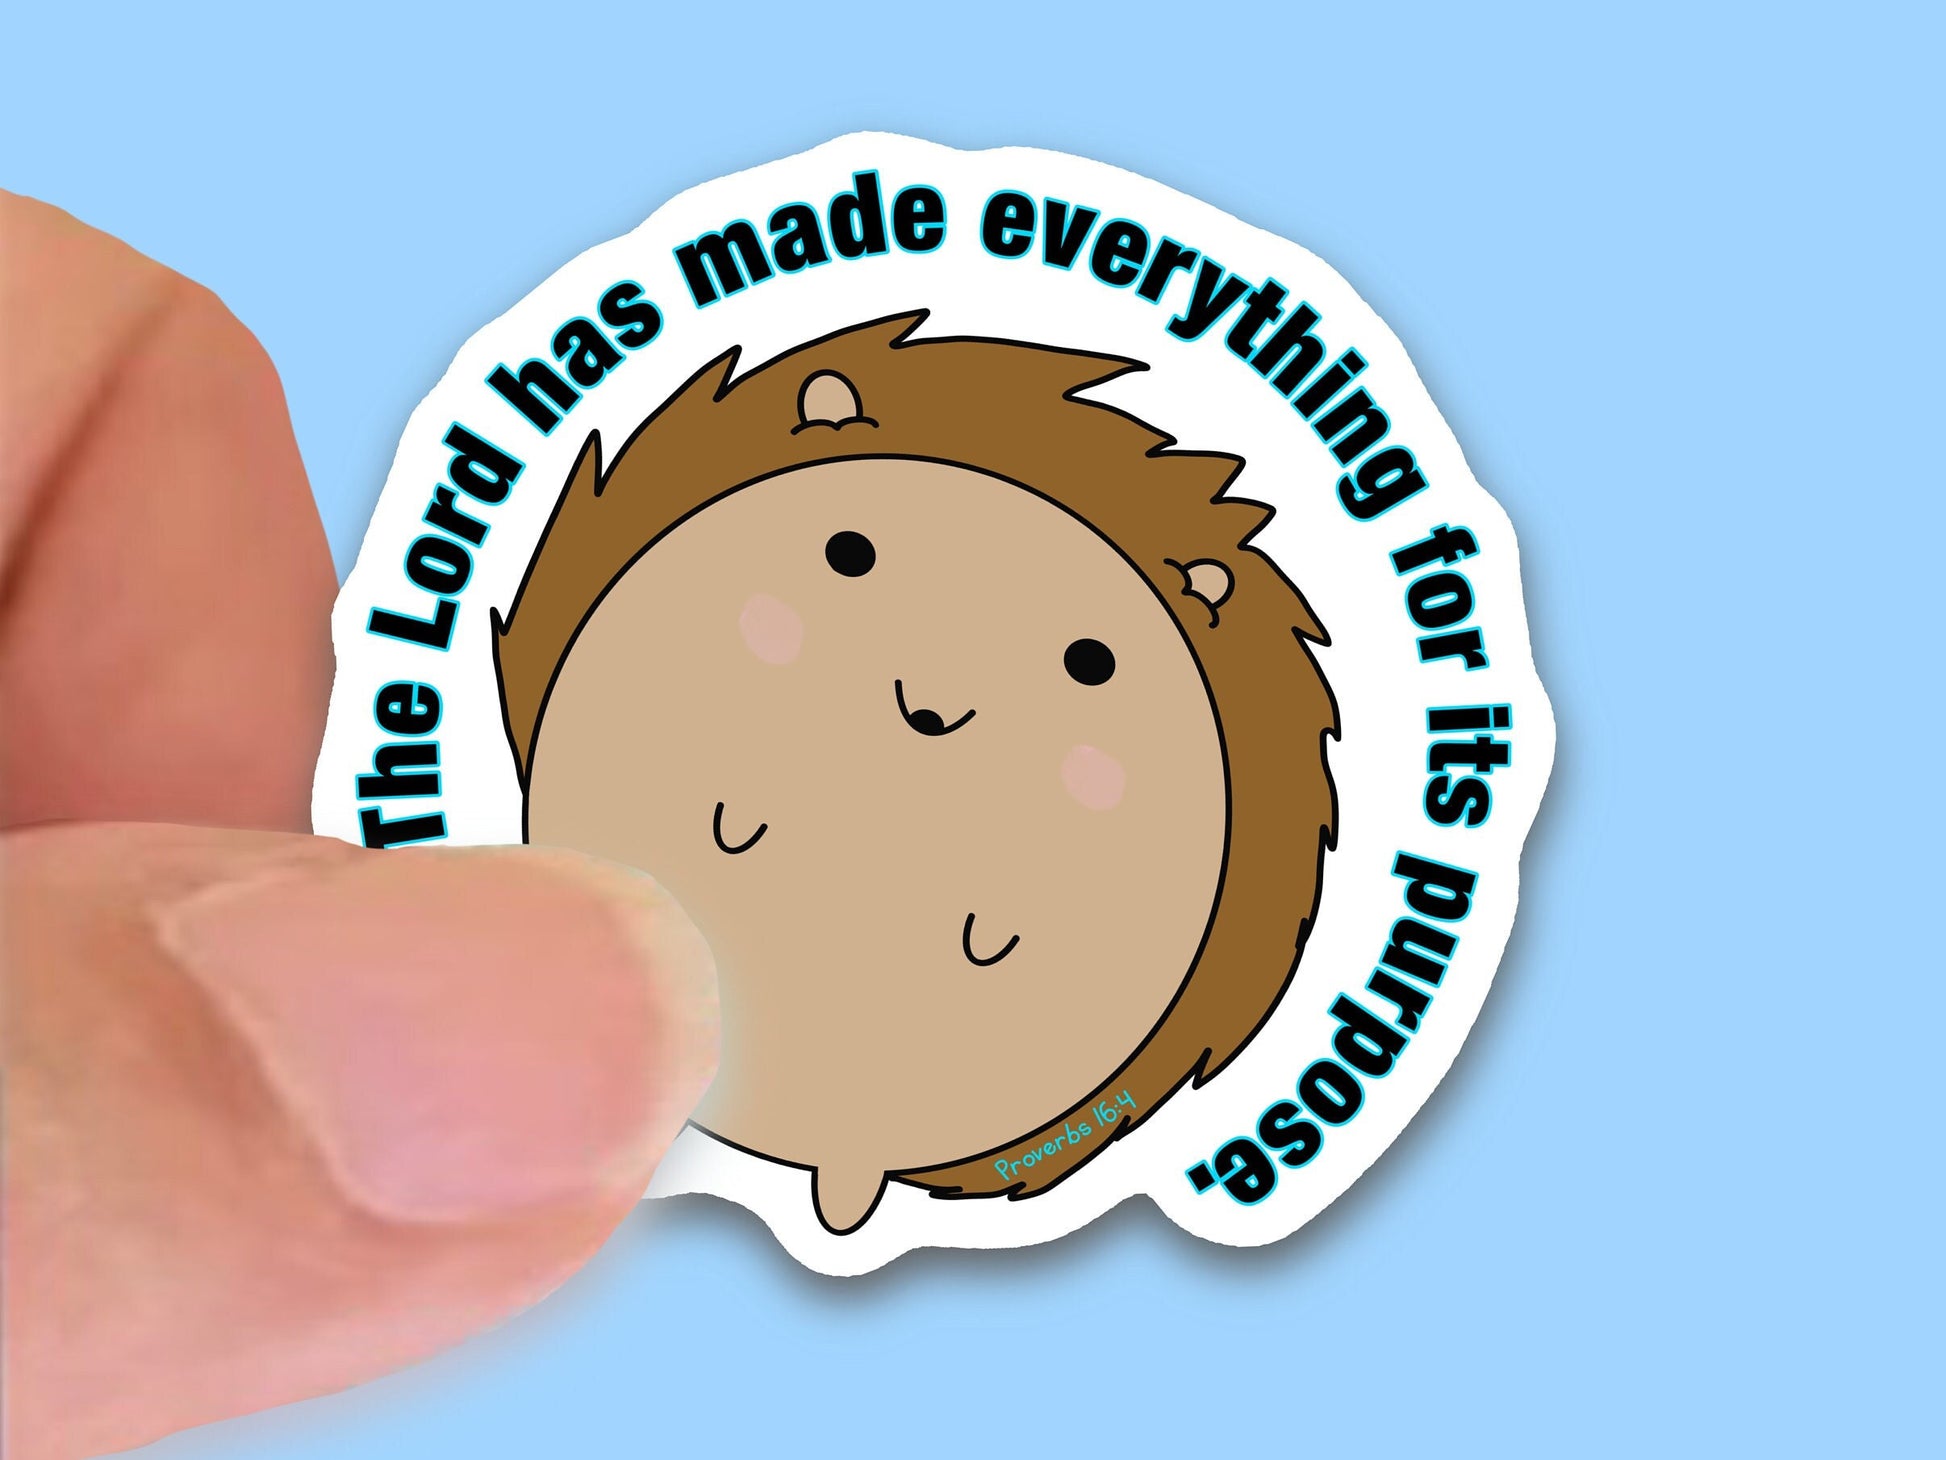 The Lord has made everything for it's purpose, Hedgehog, Christian Kid's Waterproof Vinyl Sticker/ Decal- Choice of Size, Single or Bulk qty